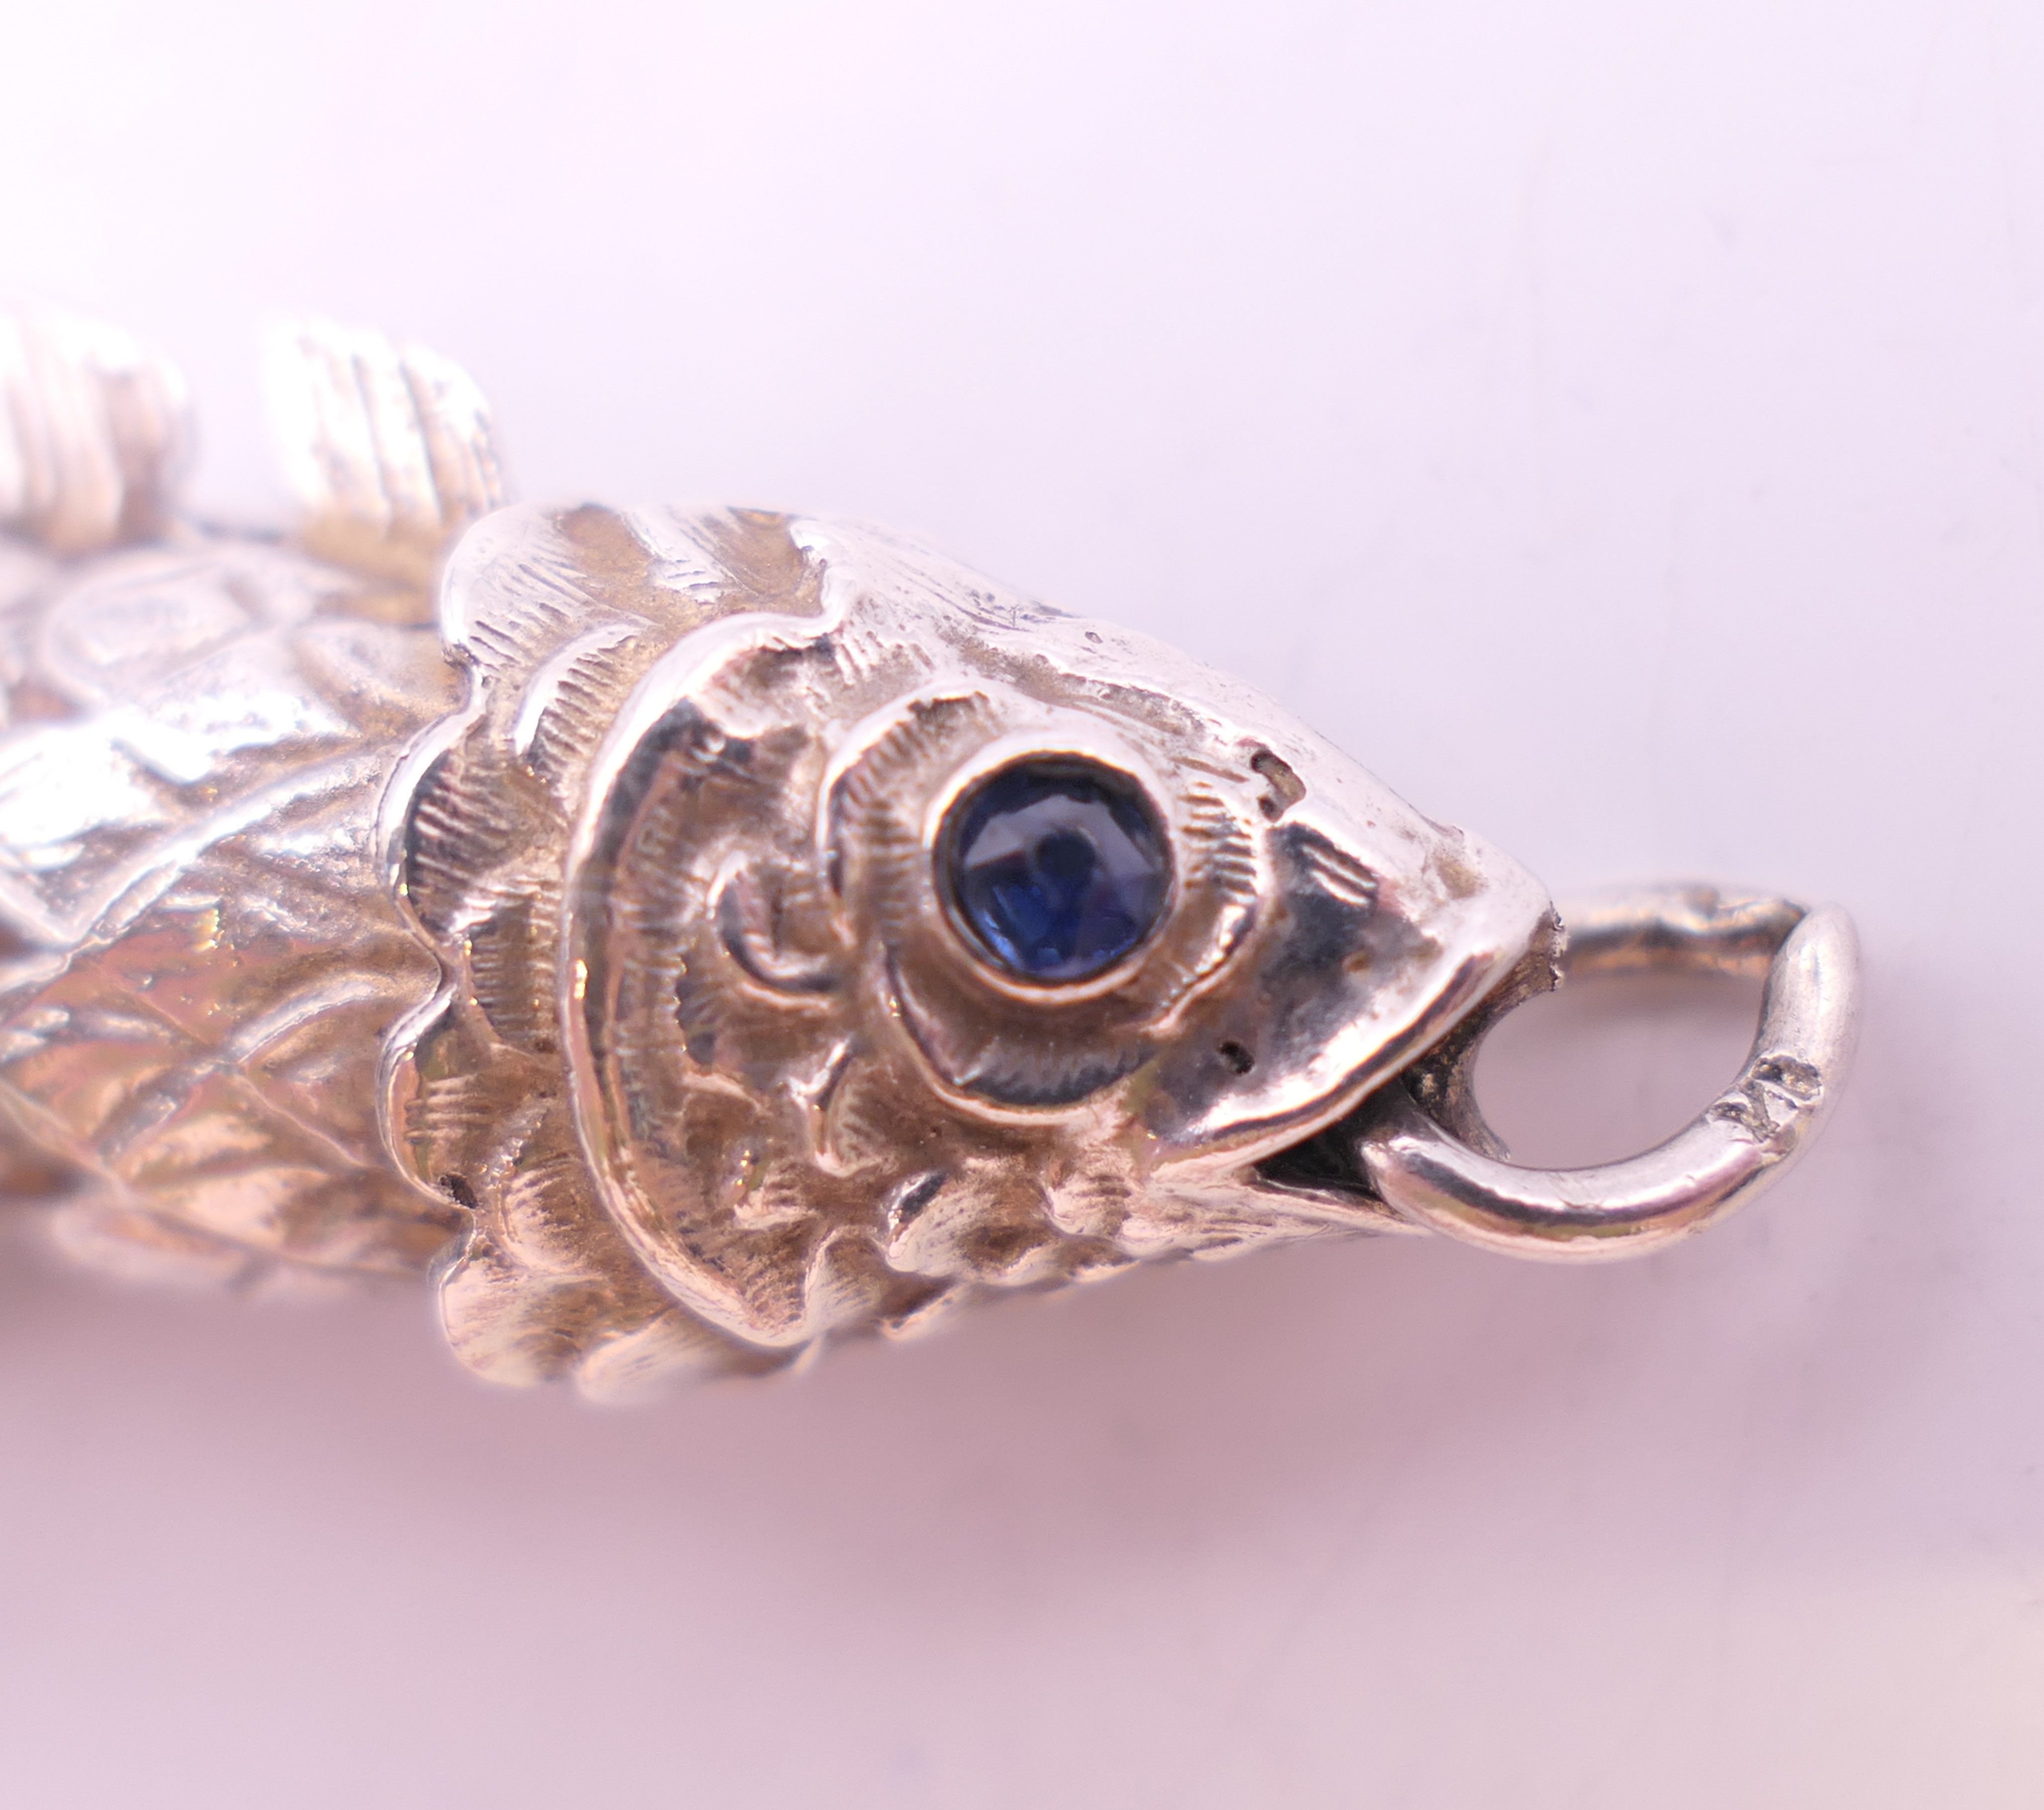 An articulated silver fish with sapphire eyes. 6 cm long. 14.8 grammes total weight. - Image 3 of 7